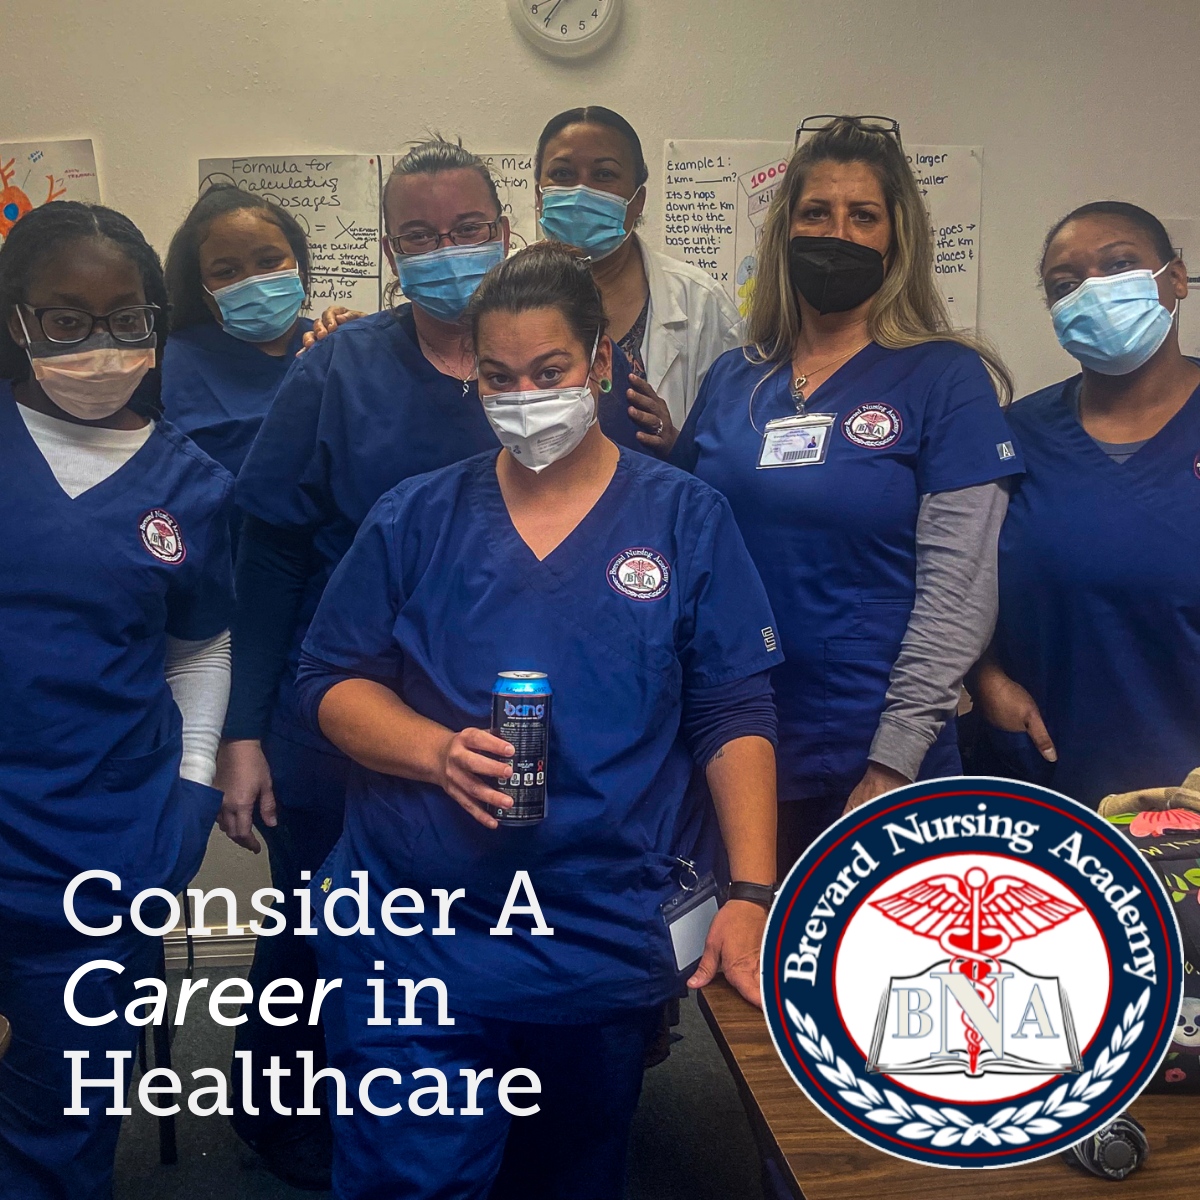 Our 5-week CNA program covers the basic nursing assistant principles as well as the student with the opportunity for practice and demonstration of skills related to patient care. #program #cna #patientcare #nursing #opportunity #skills #nursingassistant